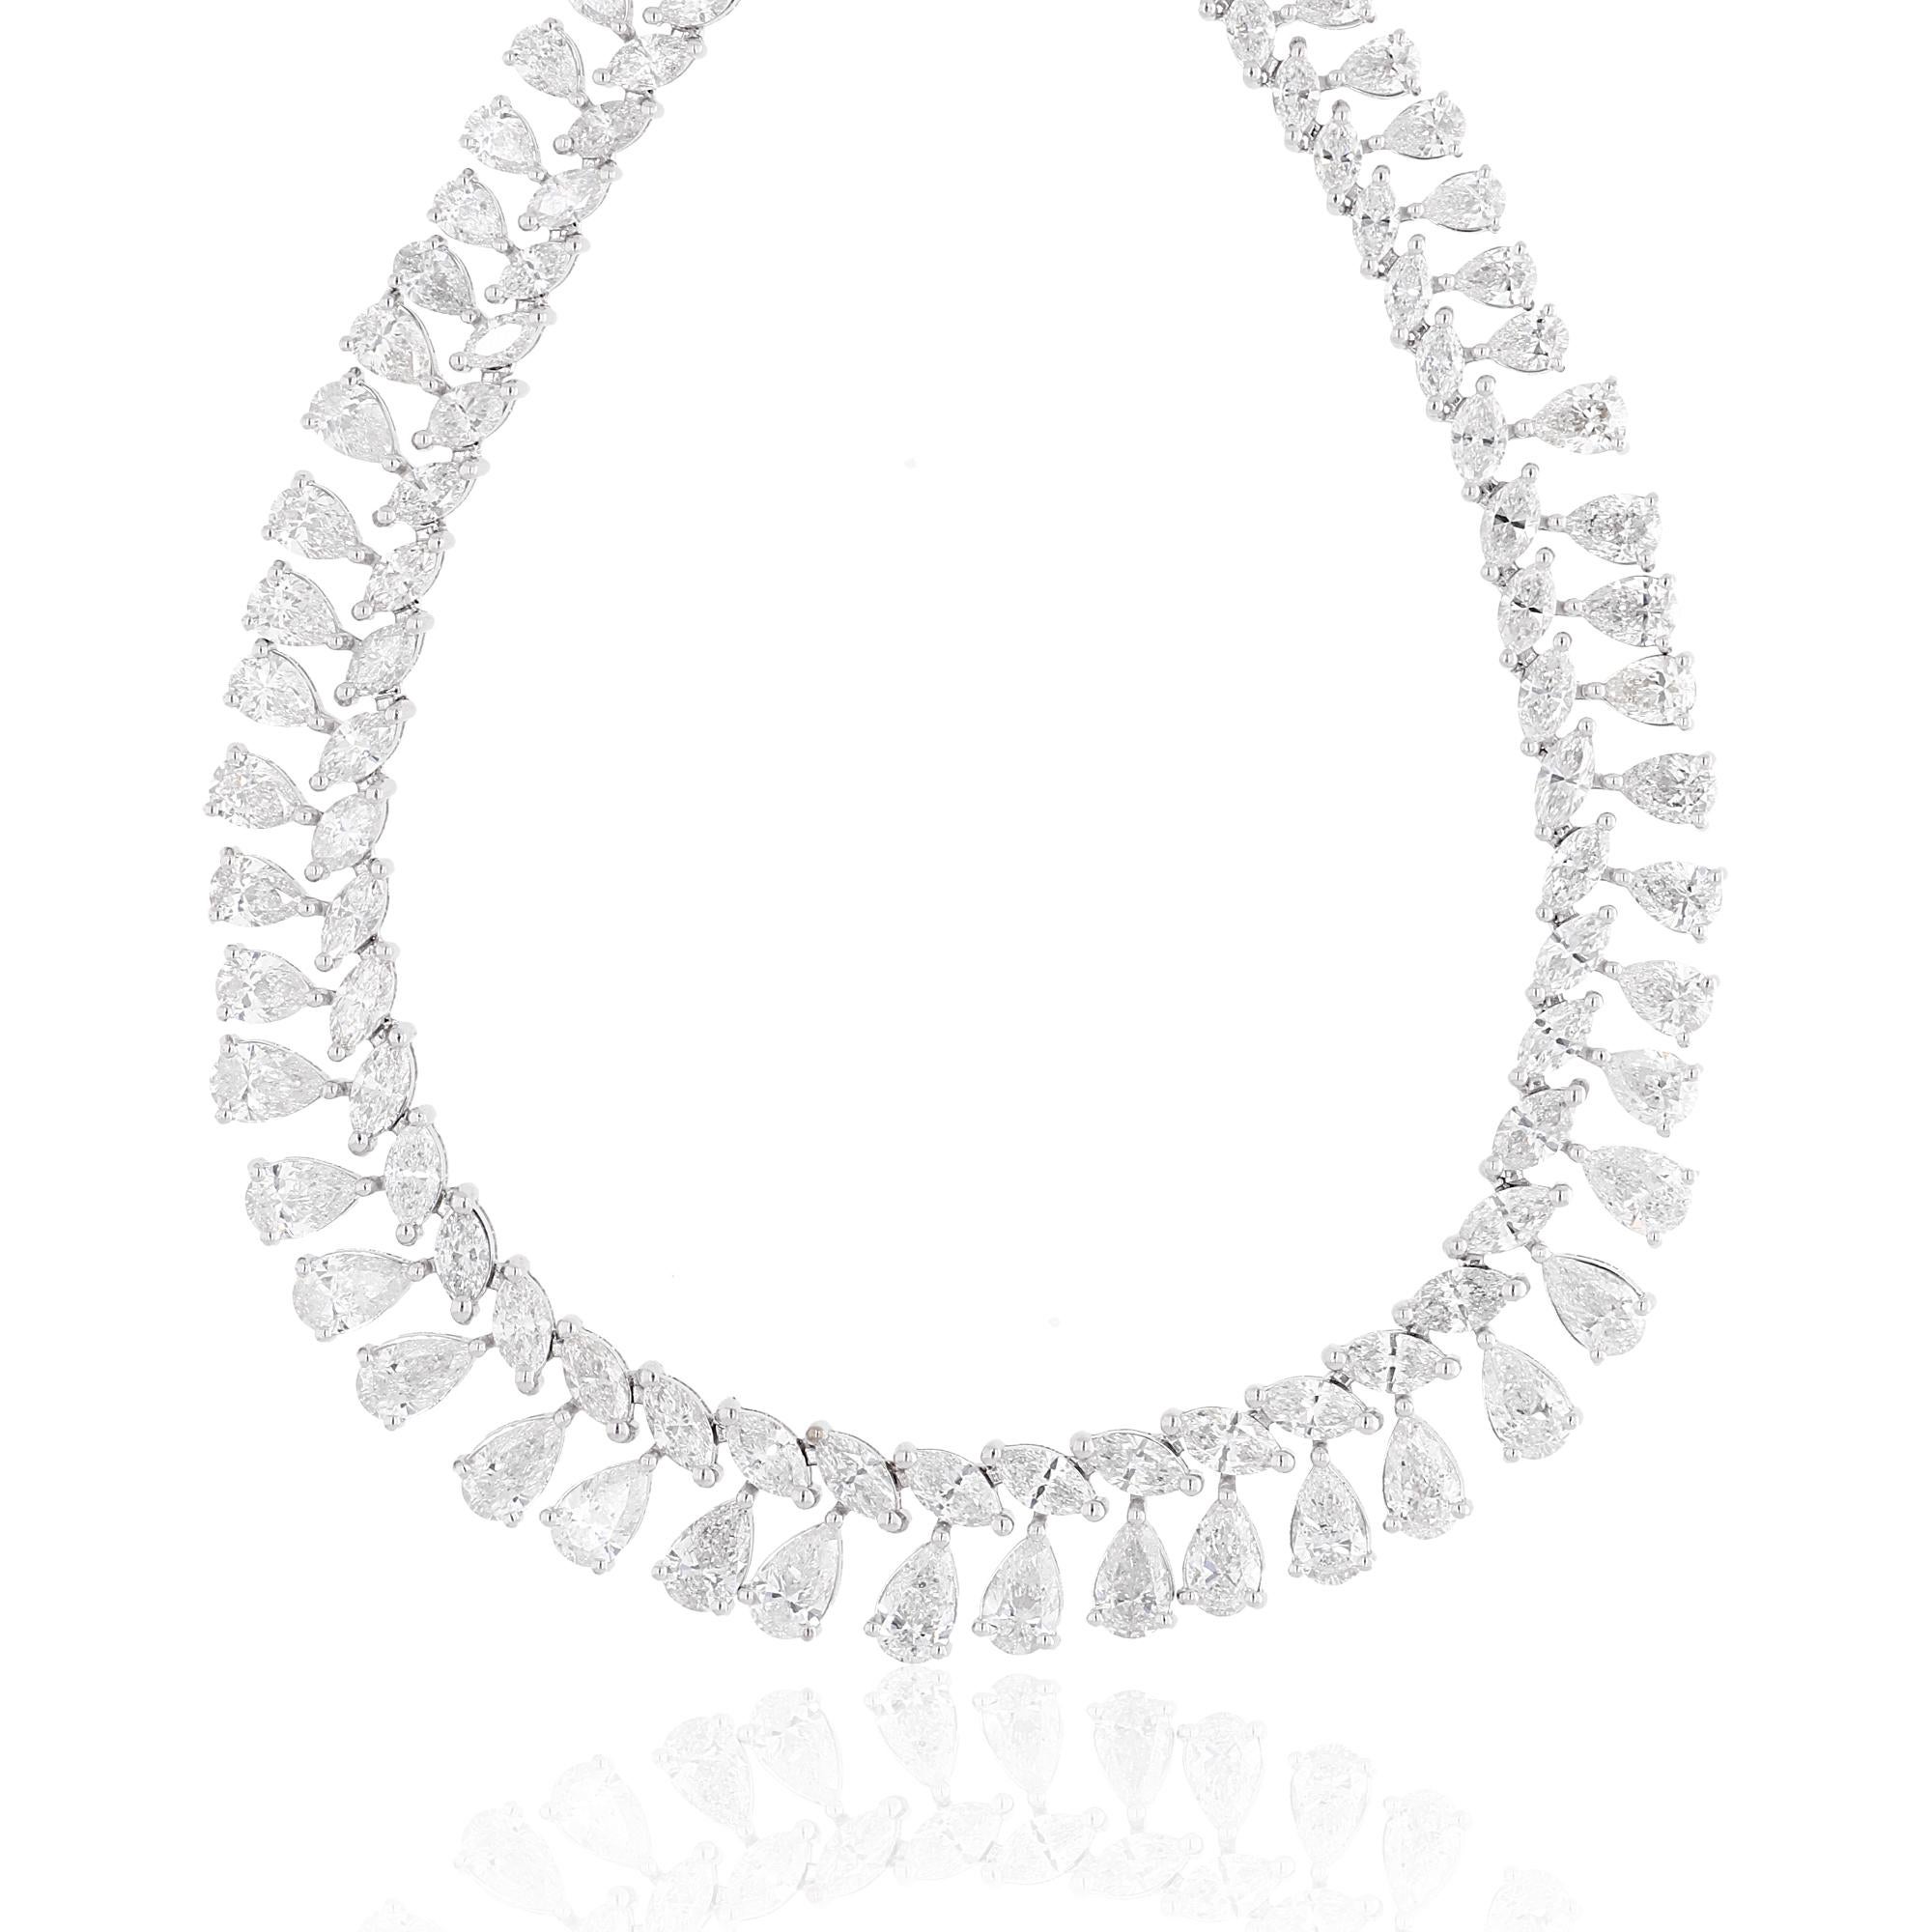 Accentuating the pear-shaped diamond are the marquise diamonds, which beautifully complement its elegance. The marquise-cut diamonds, known for their elongated shape and tapered ends, create a sense of fluidity and movement in the necklace. These